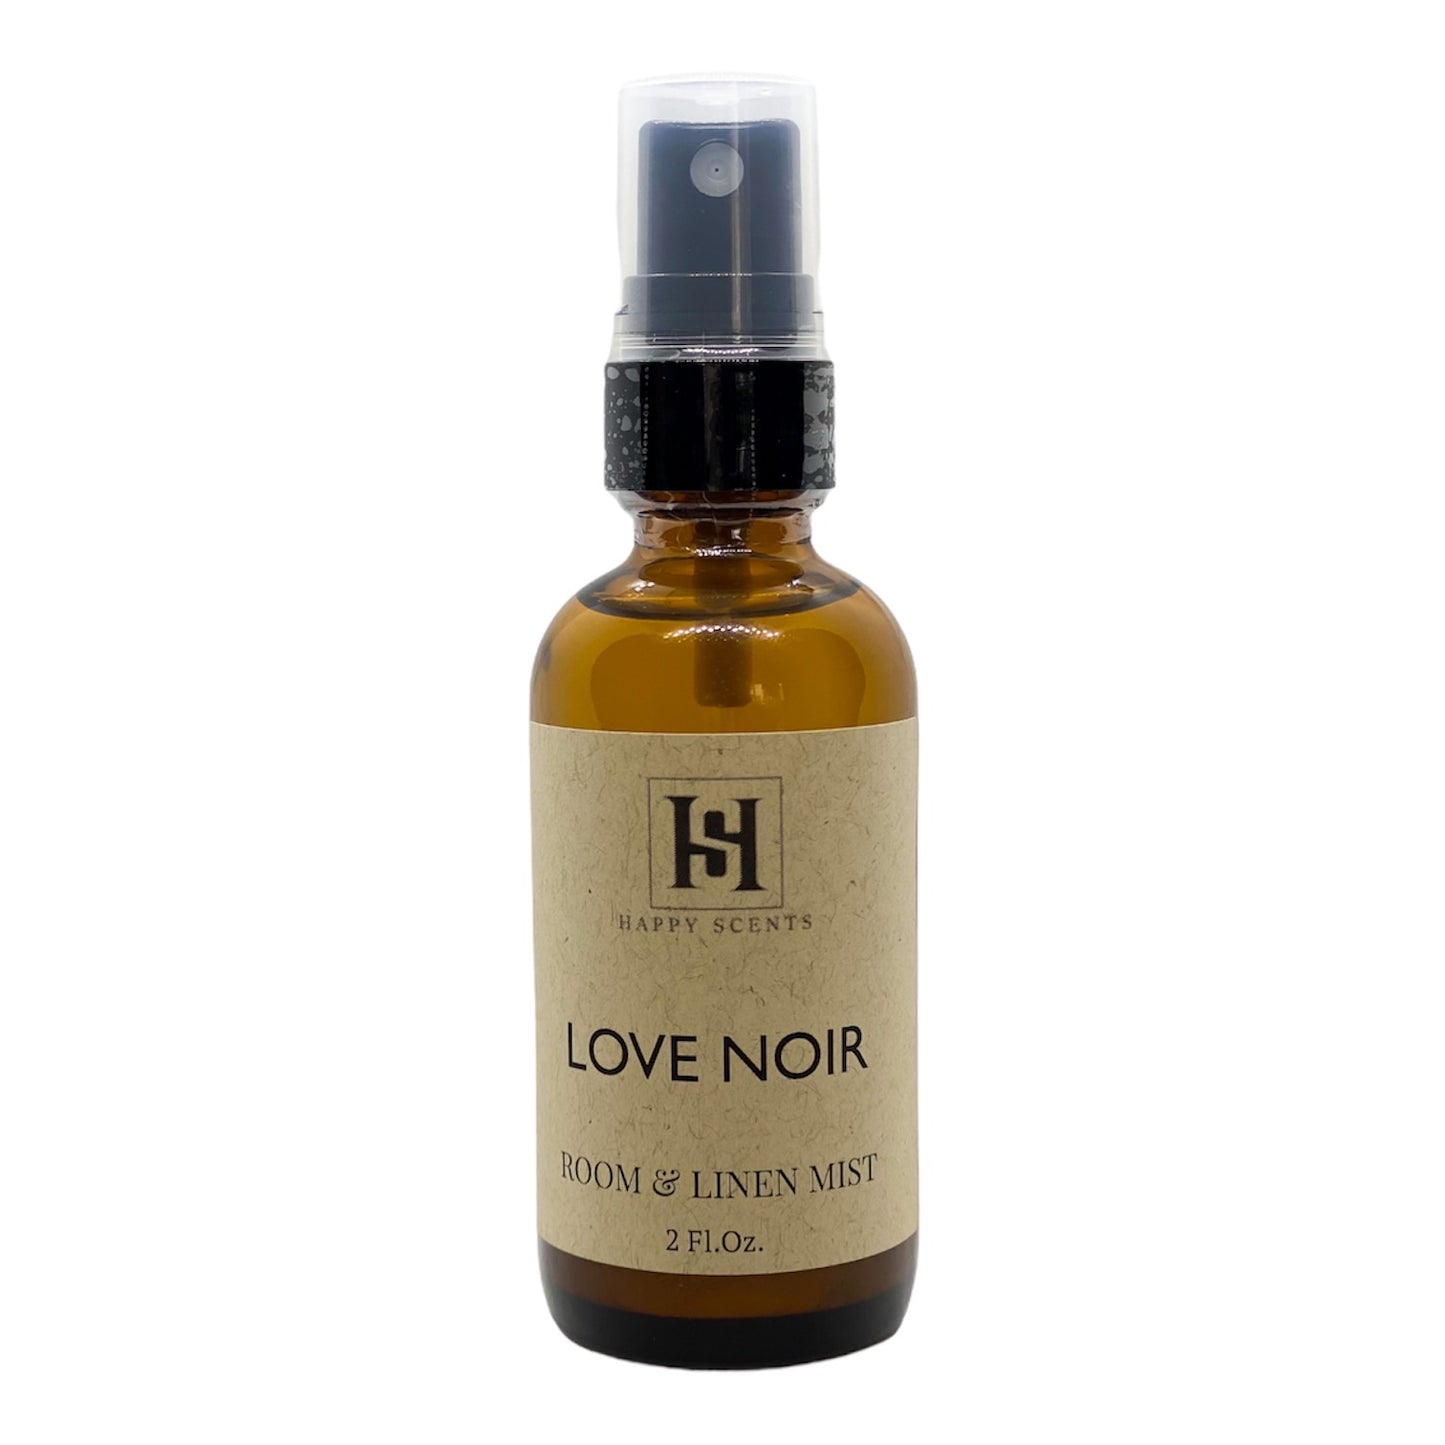 Love Noir room and linen mist hand crafted by Happy Scents.